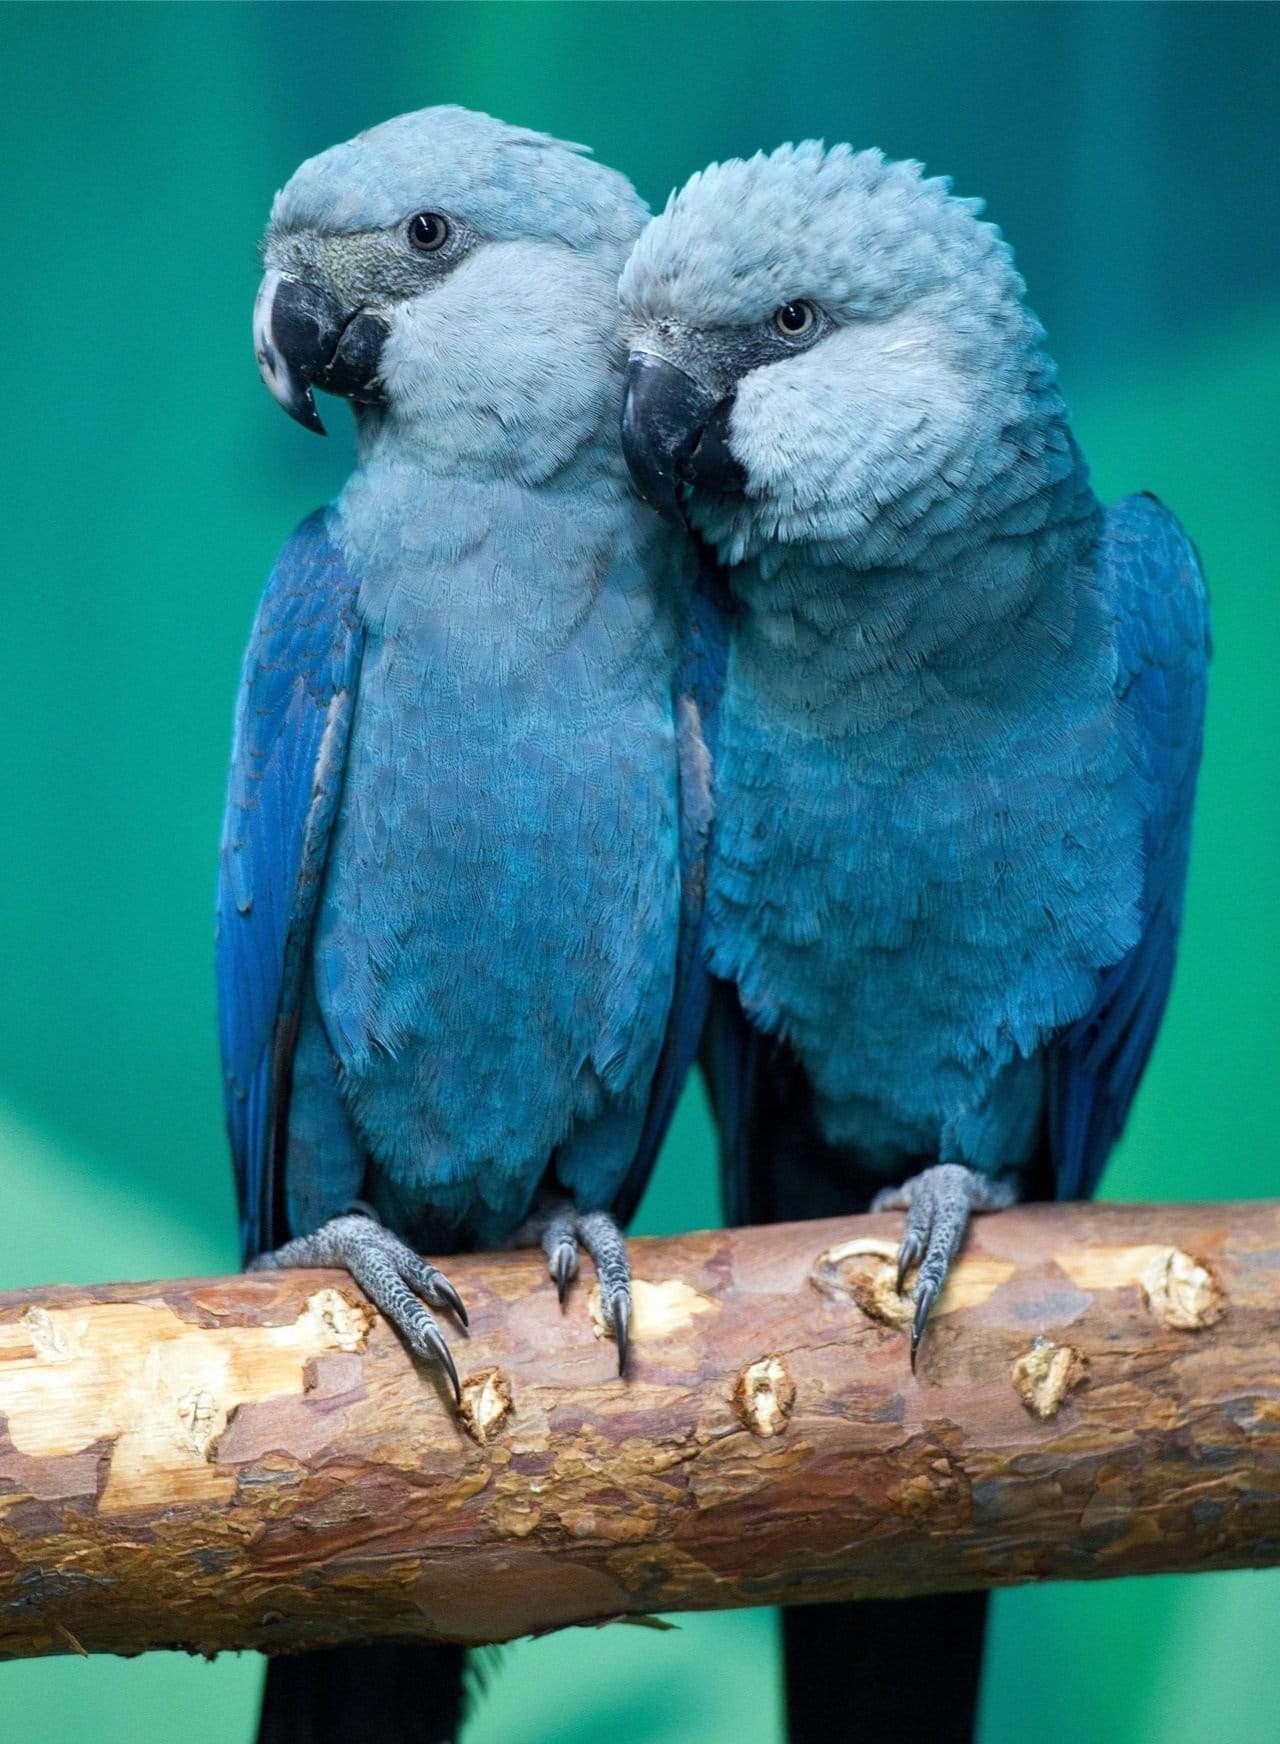 Color inspiration: Spix's Macaw, also known as the little blue macaw, an endangered parrot species native to Brazil and famous for its natural gradient of blue feathers.